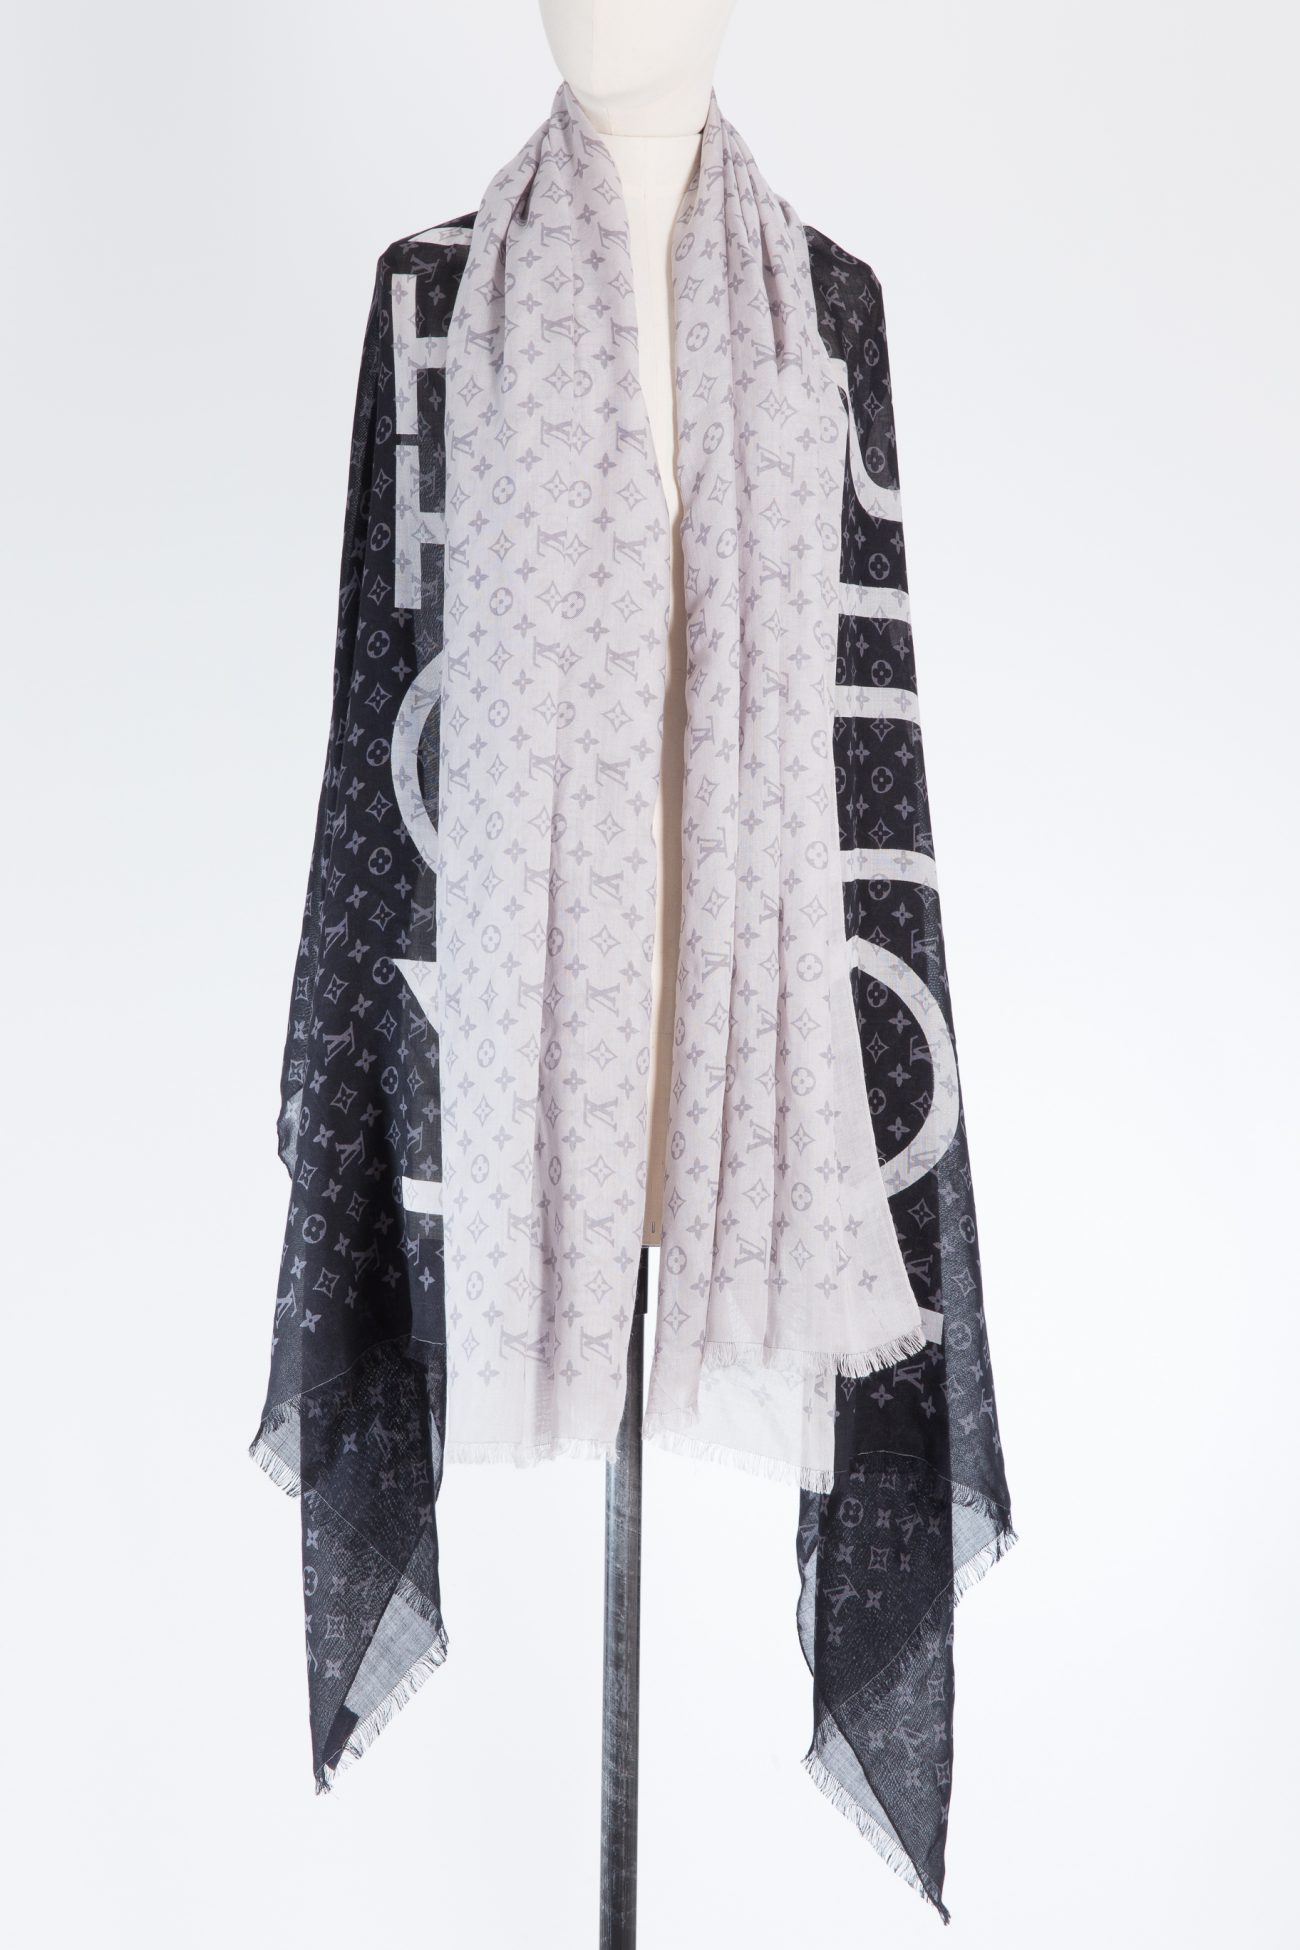 Louis Vuitton Shawl, One Size - Huntessa Luxury Online Consignment Boutique